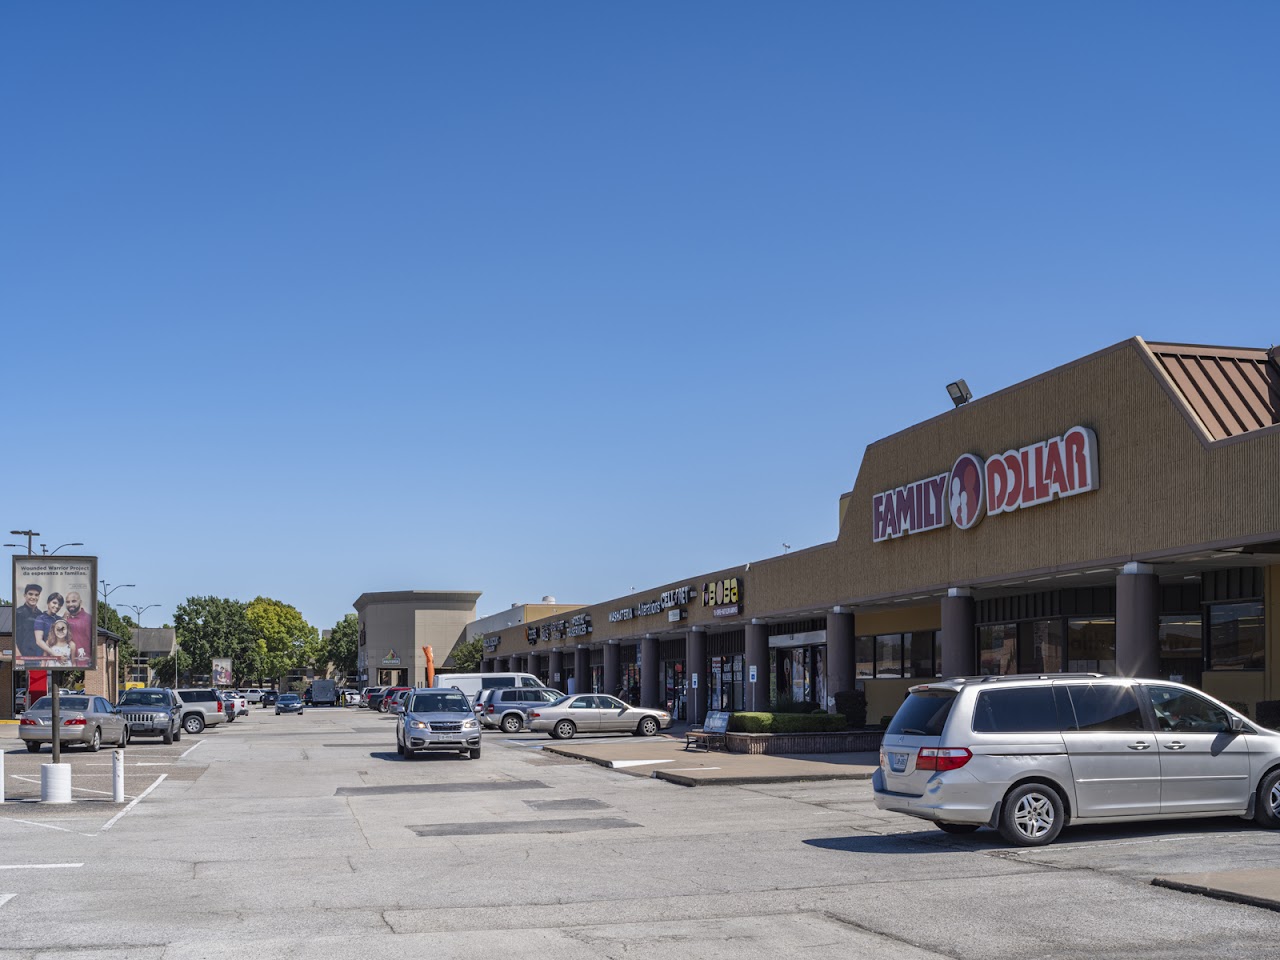 Photo of Curative Keegan's Meadow Shopping Center - Kiosk COVID Testing at 11753 W Bellfort St, Stafford, TX 77477, USA